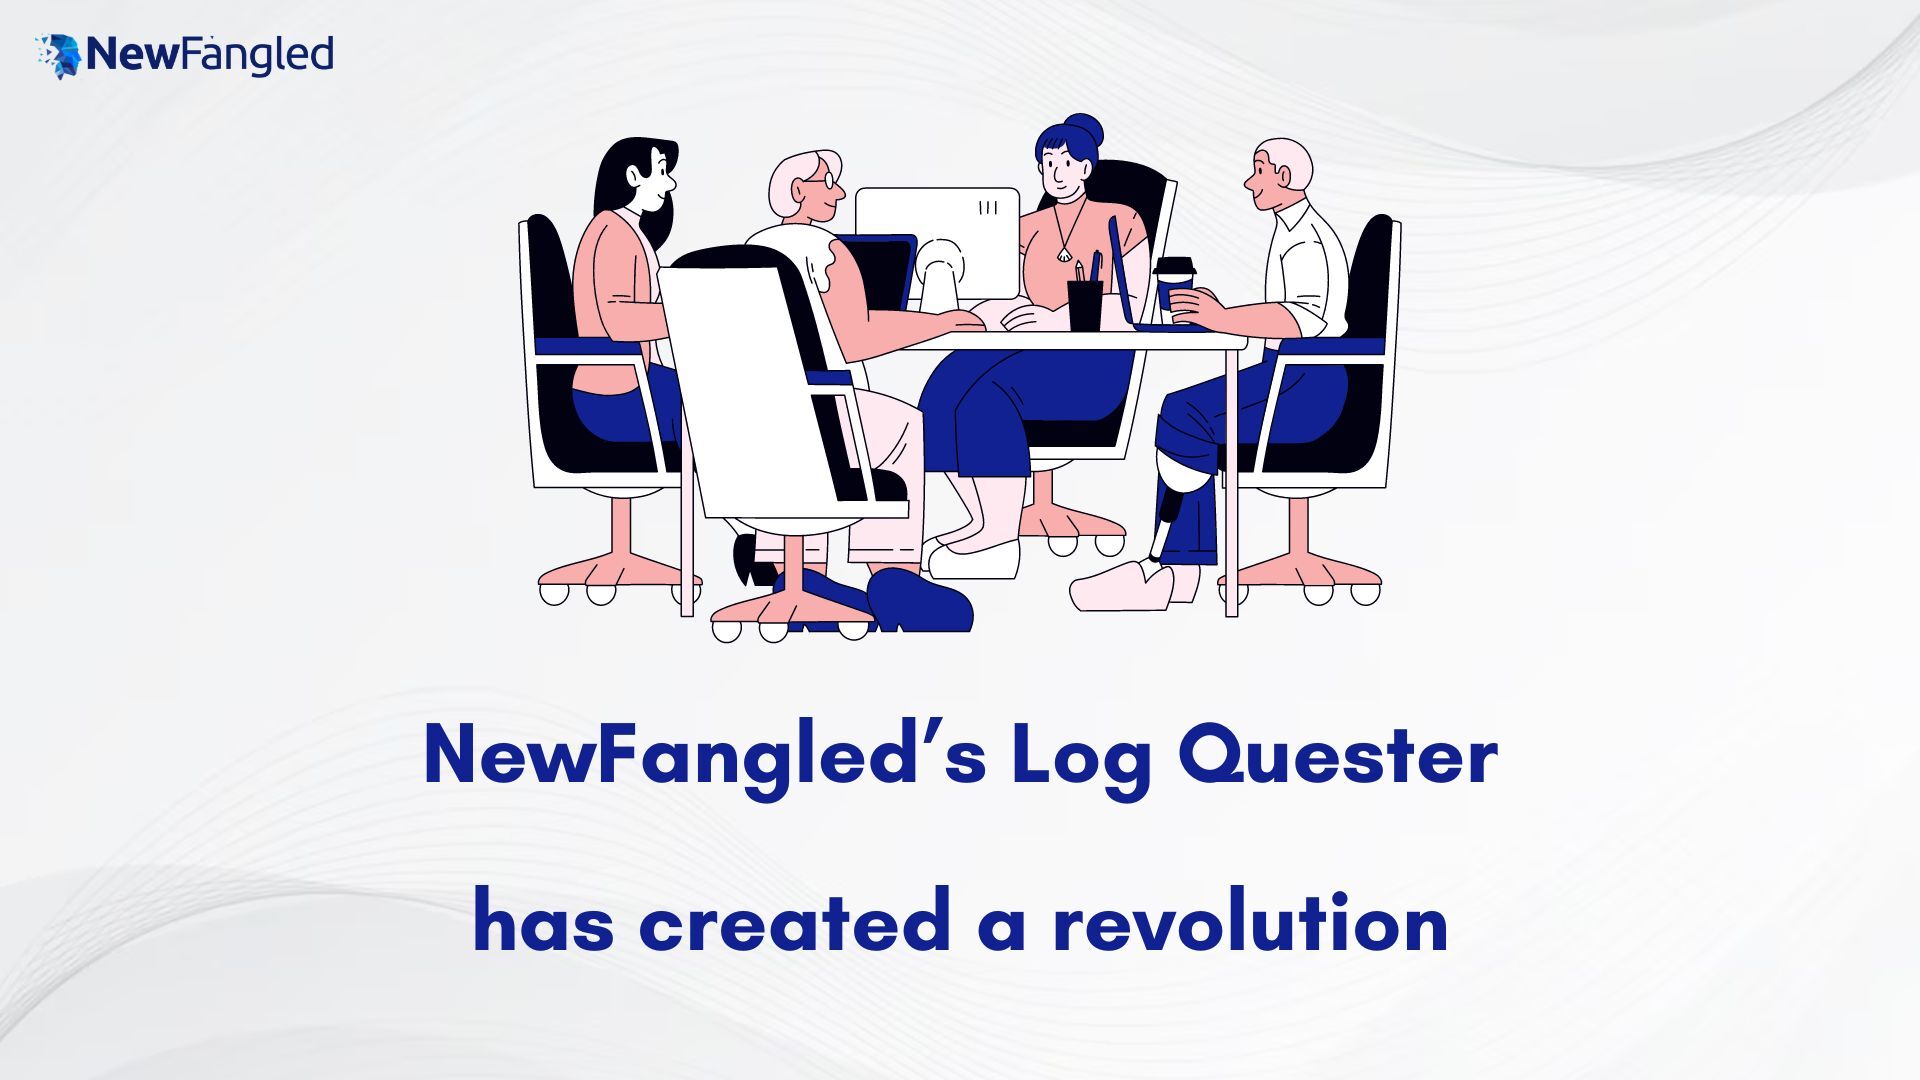  NewFangled’s Log Quester has created a revolution